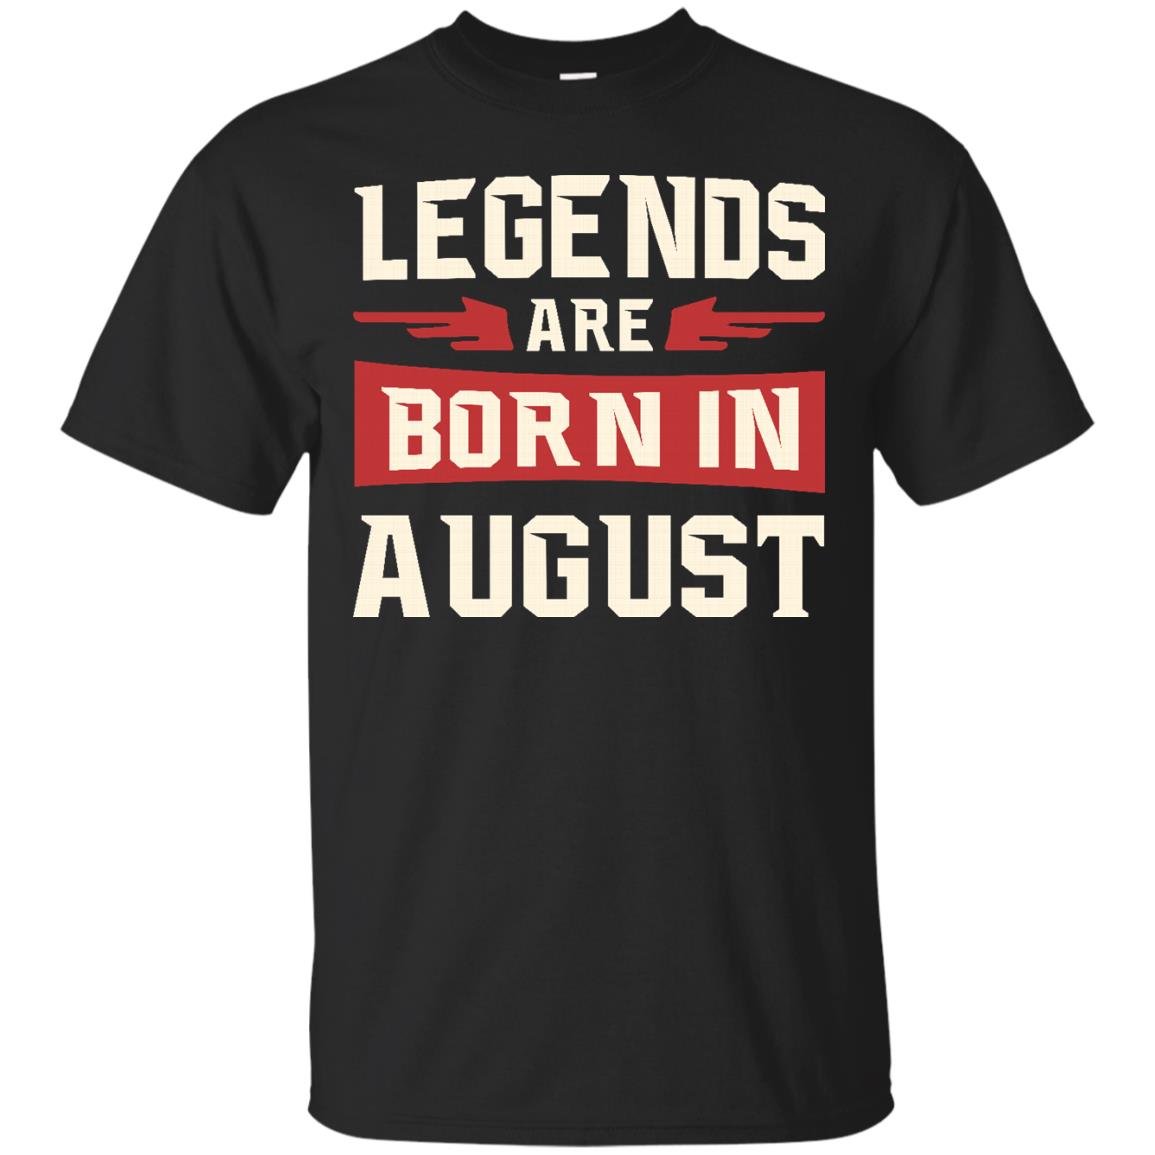 Jason Statham: legends are born in August shirt, hoodie